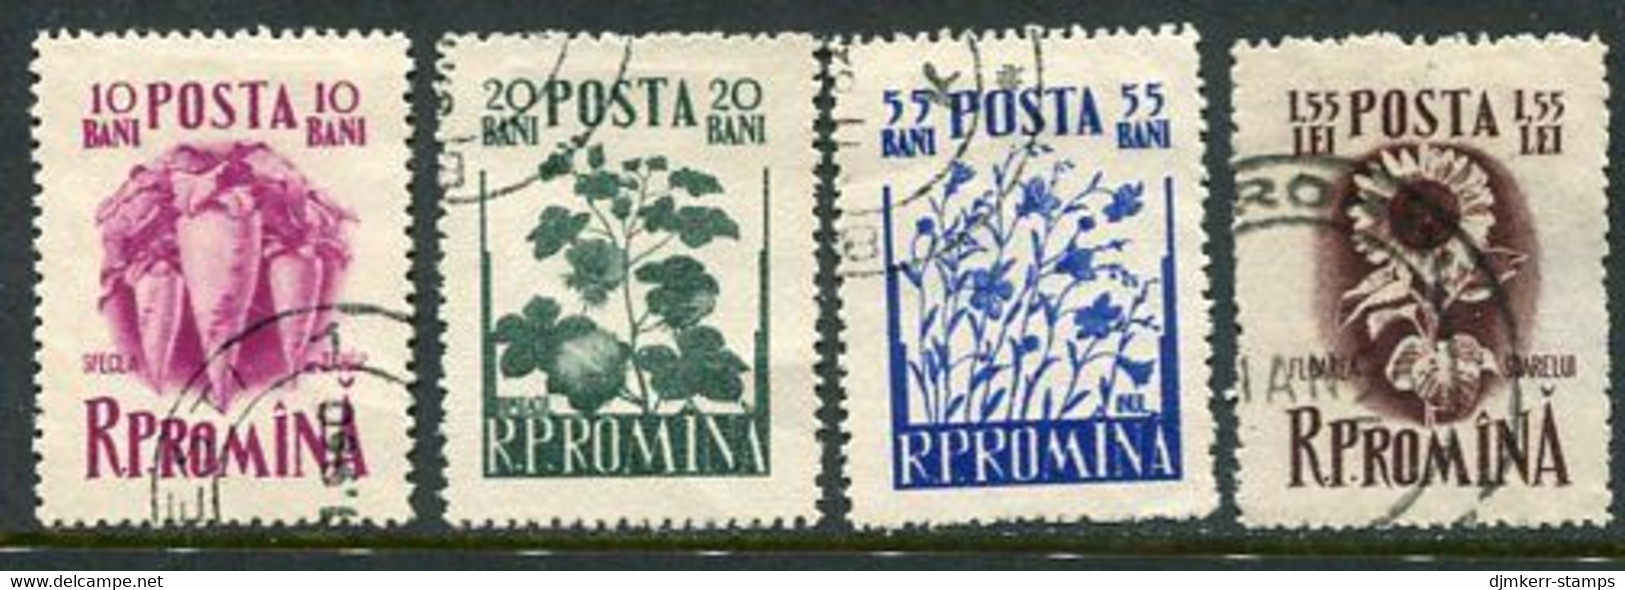 ROMANIA 1955 Agricultural Plants Used.  Michel 1547-50 - Used Stamps